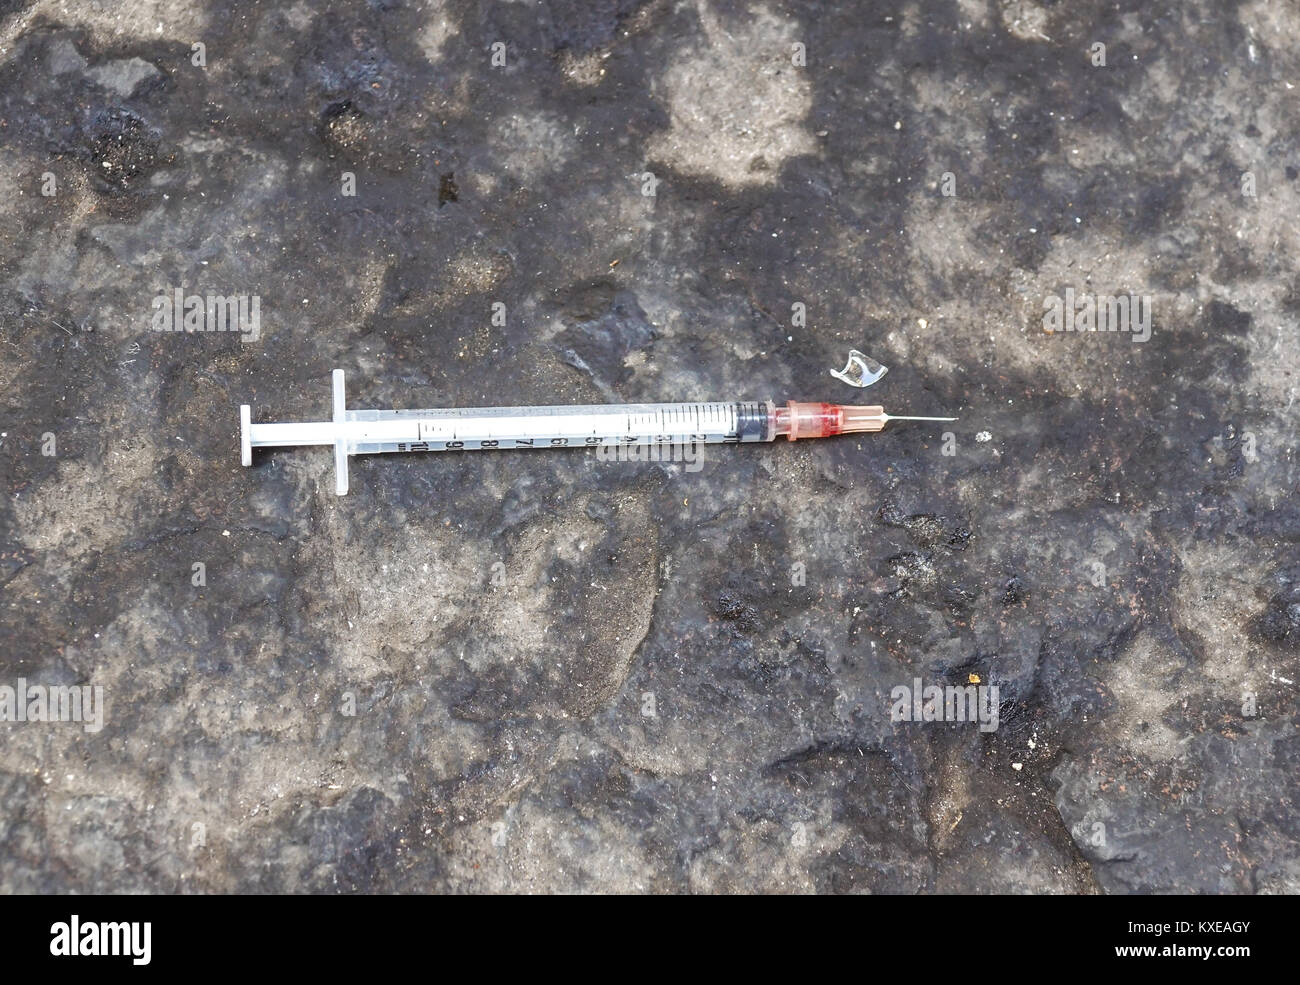 substance abuse, addiction and drug use concept - close up of used syringes on ground Stock Photo